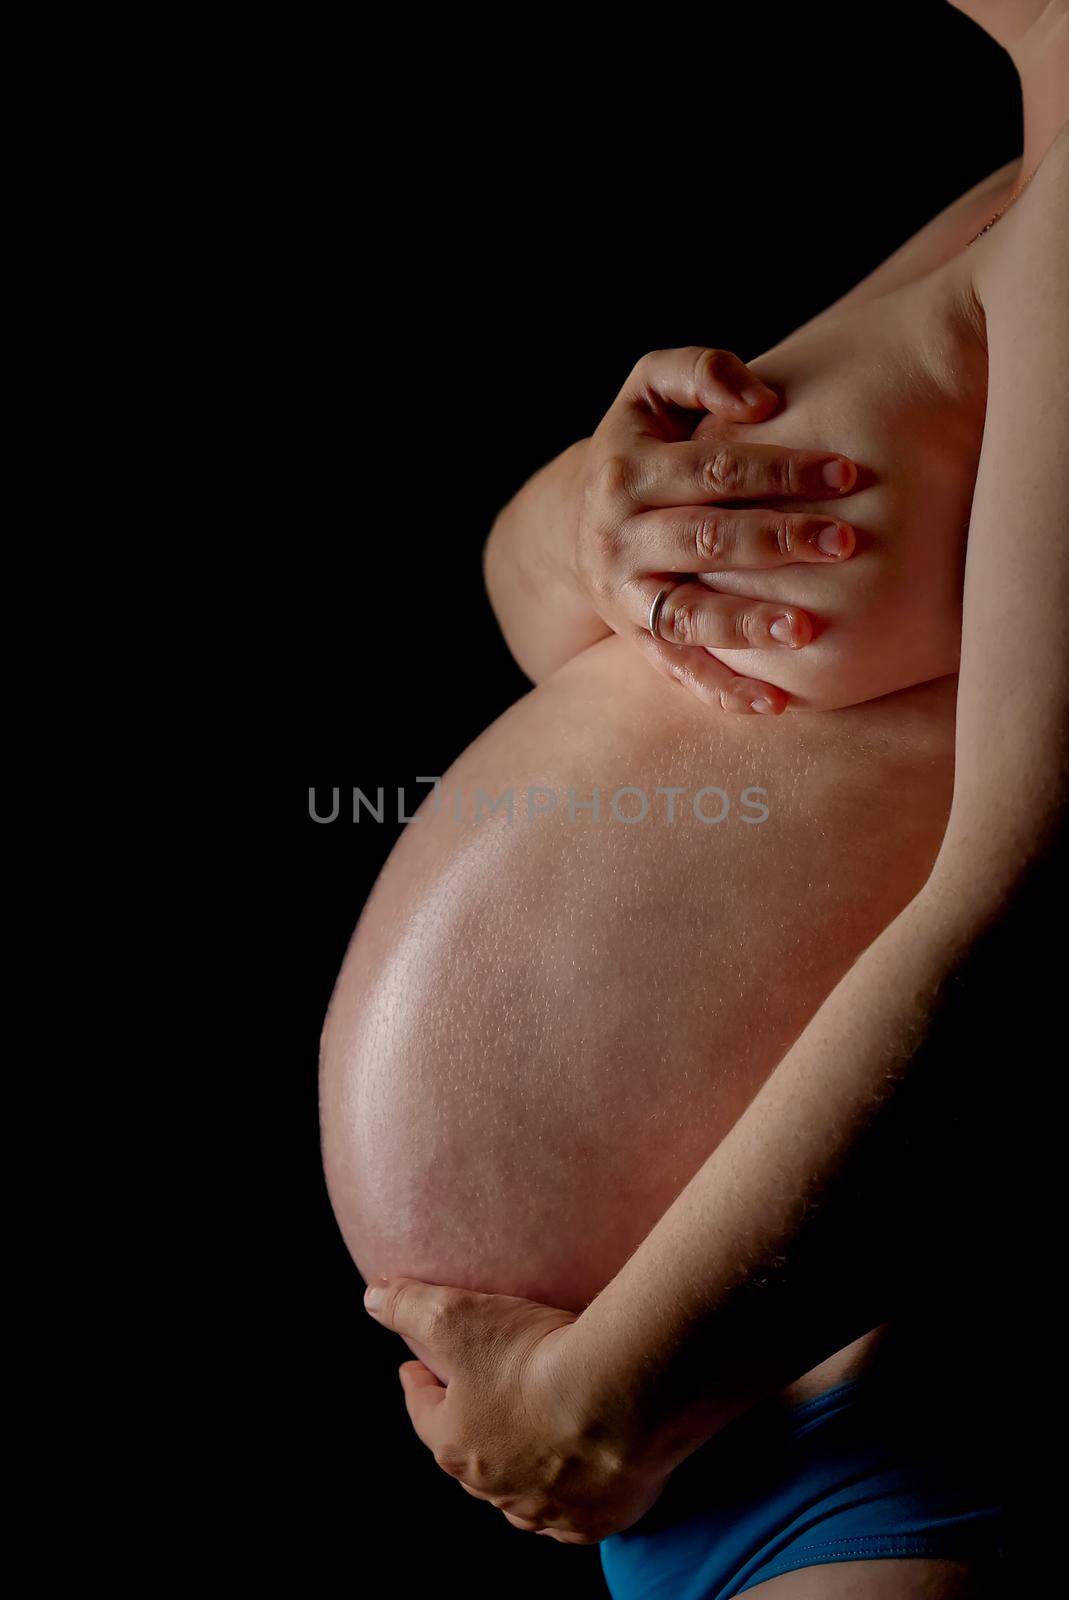 Belly of a pregnant woman on the black background. Belly of a pregnant woman in low key. Body of a 9-month pregnant woman. 40 weeks pregnant women infront of black backdrop